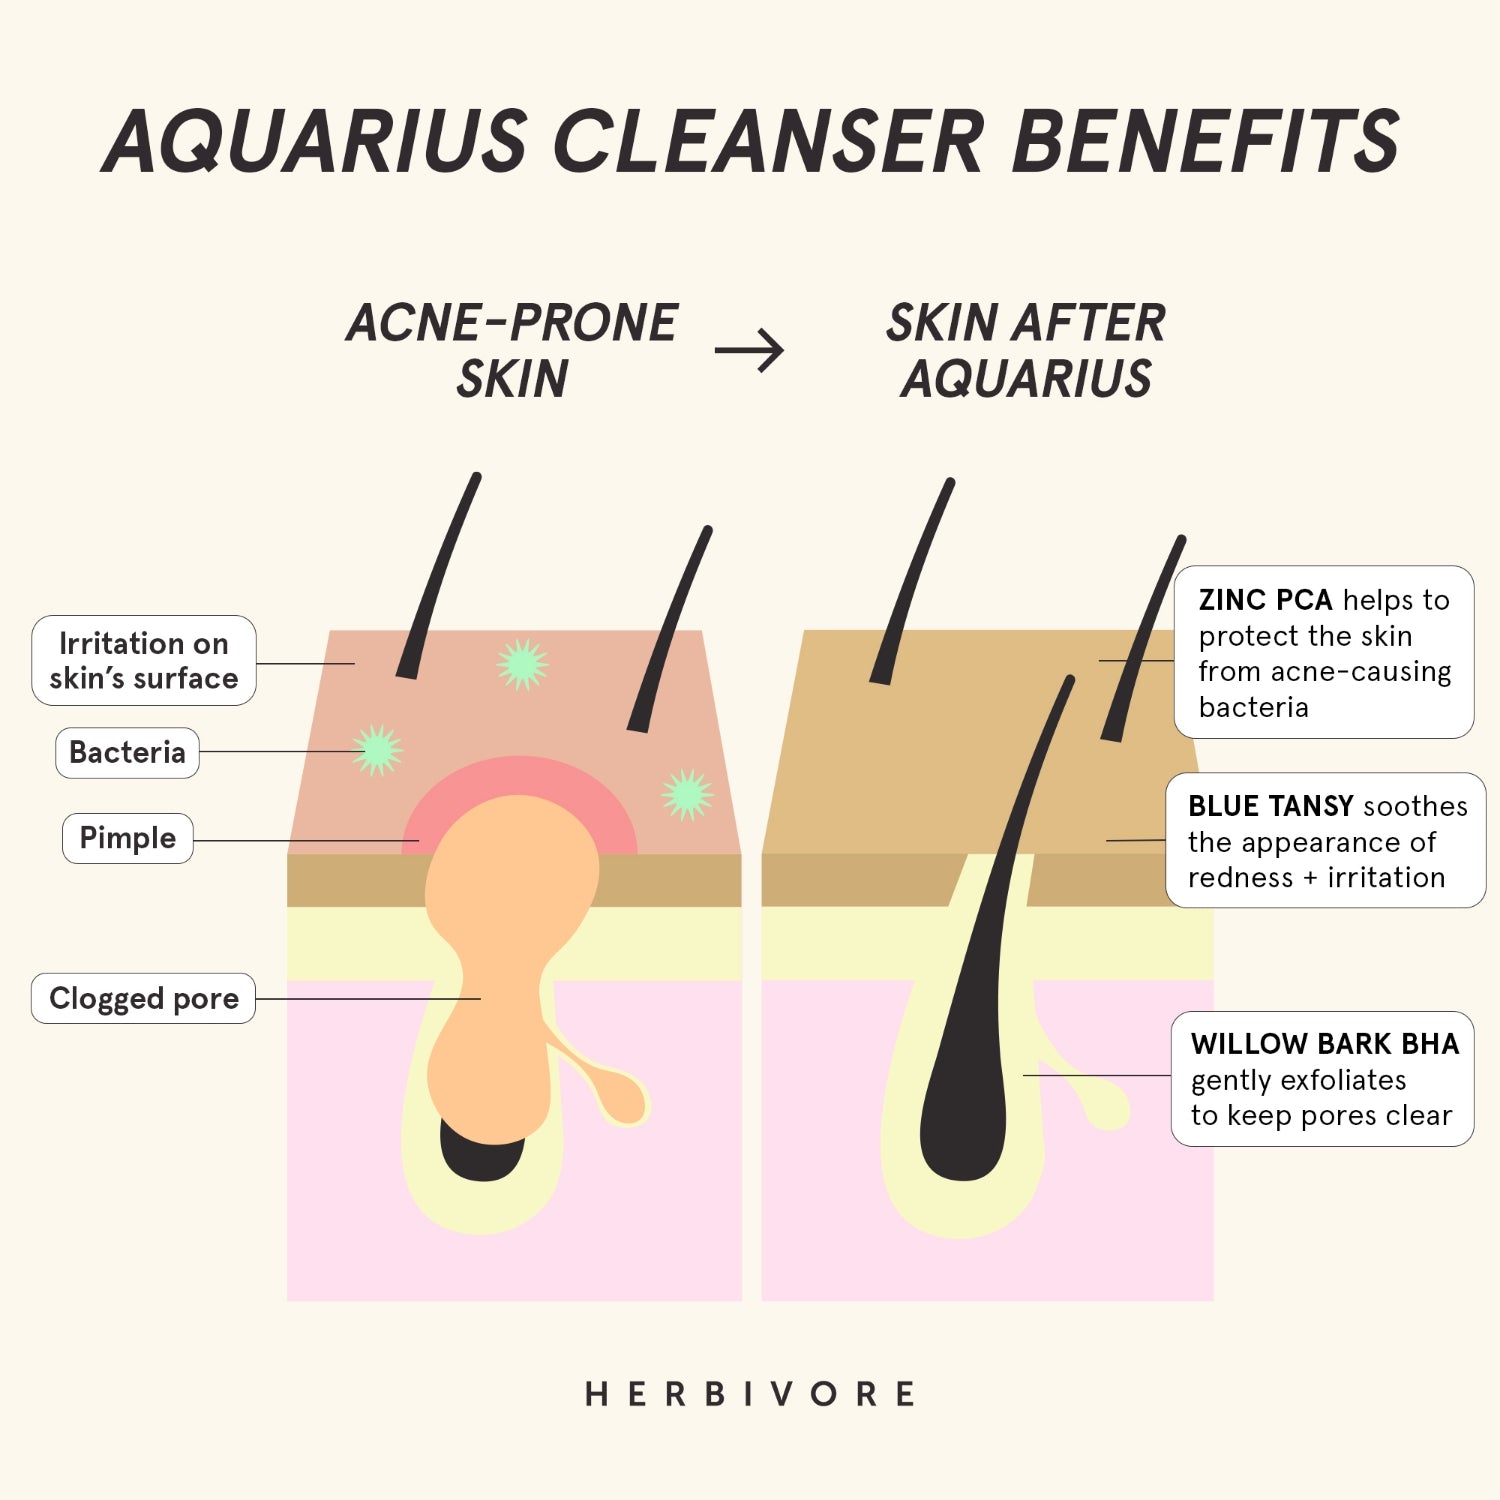 Infographic of acne-prone skin and what it looks like after using Aquarius Cleanser.